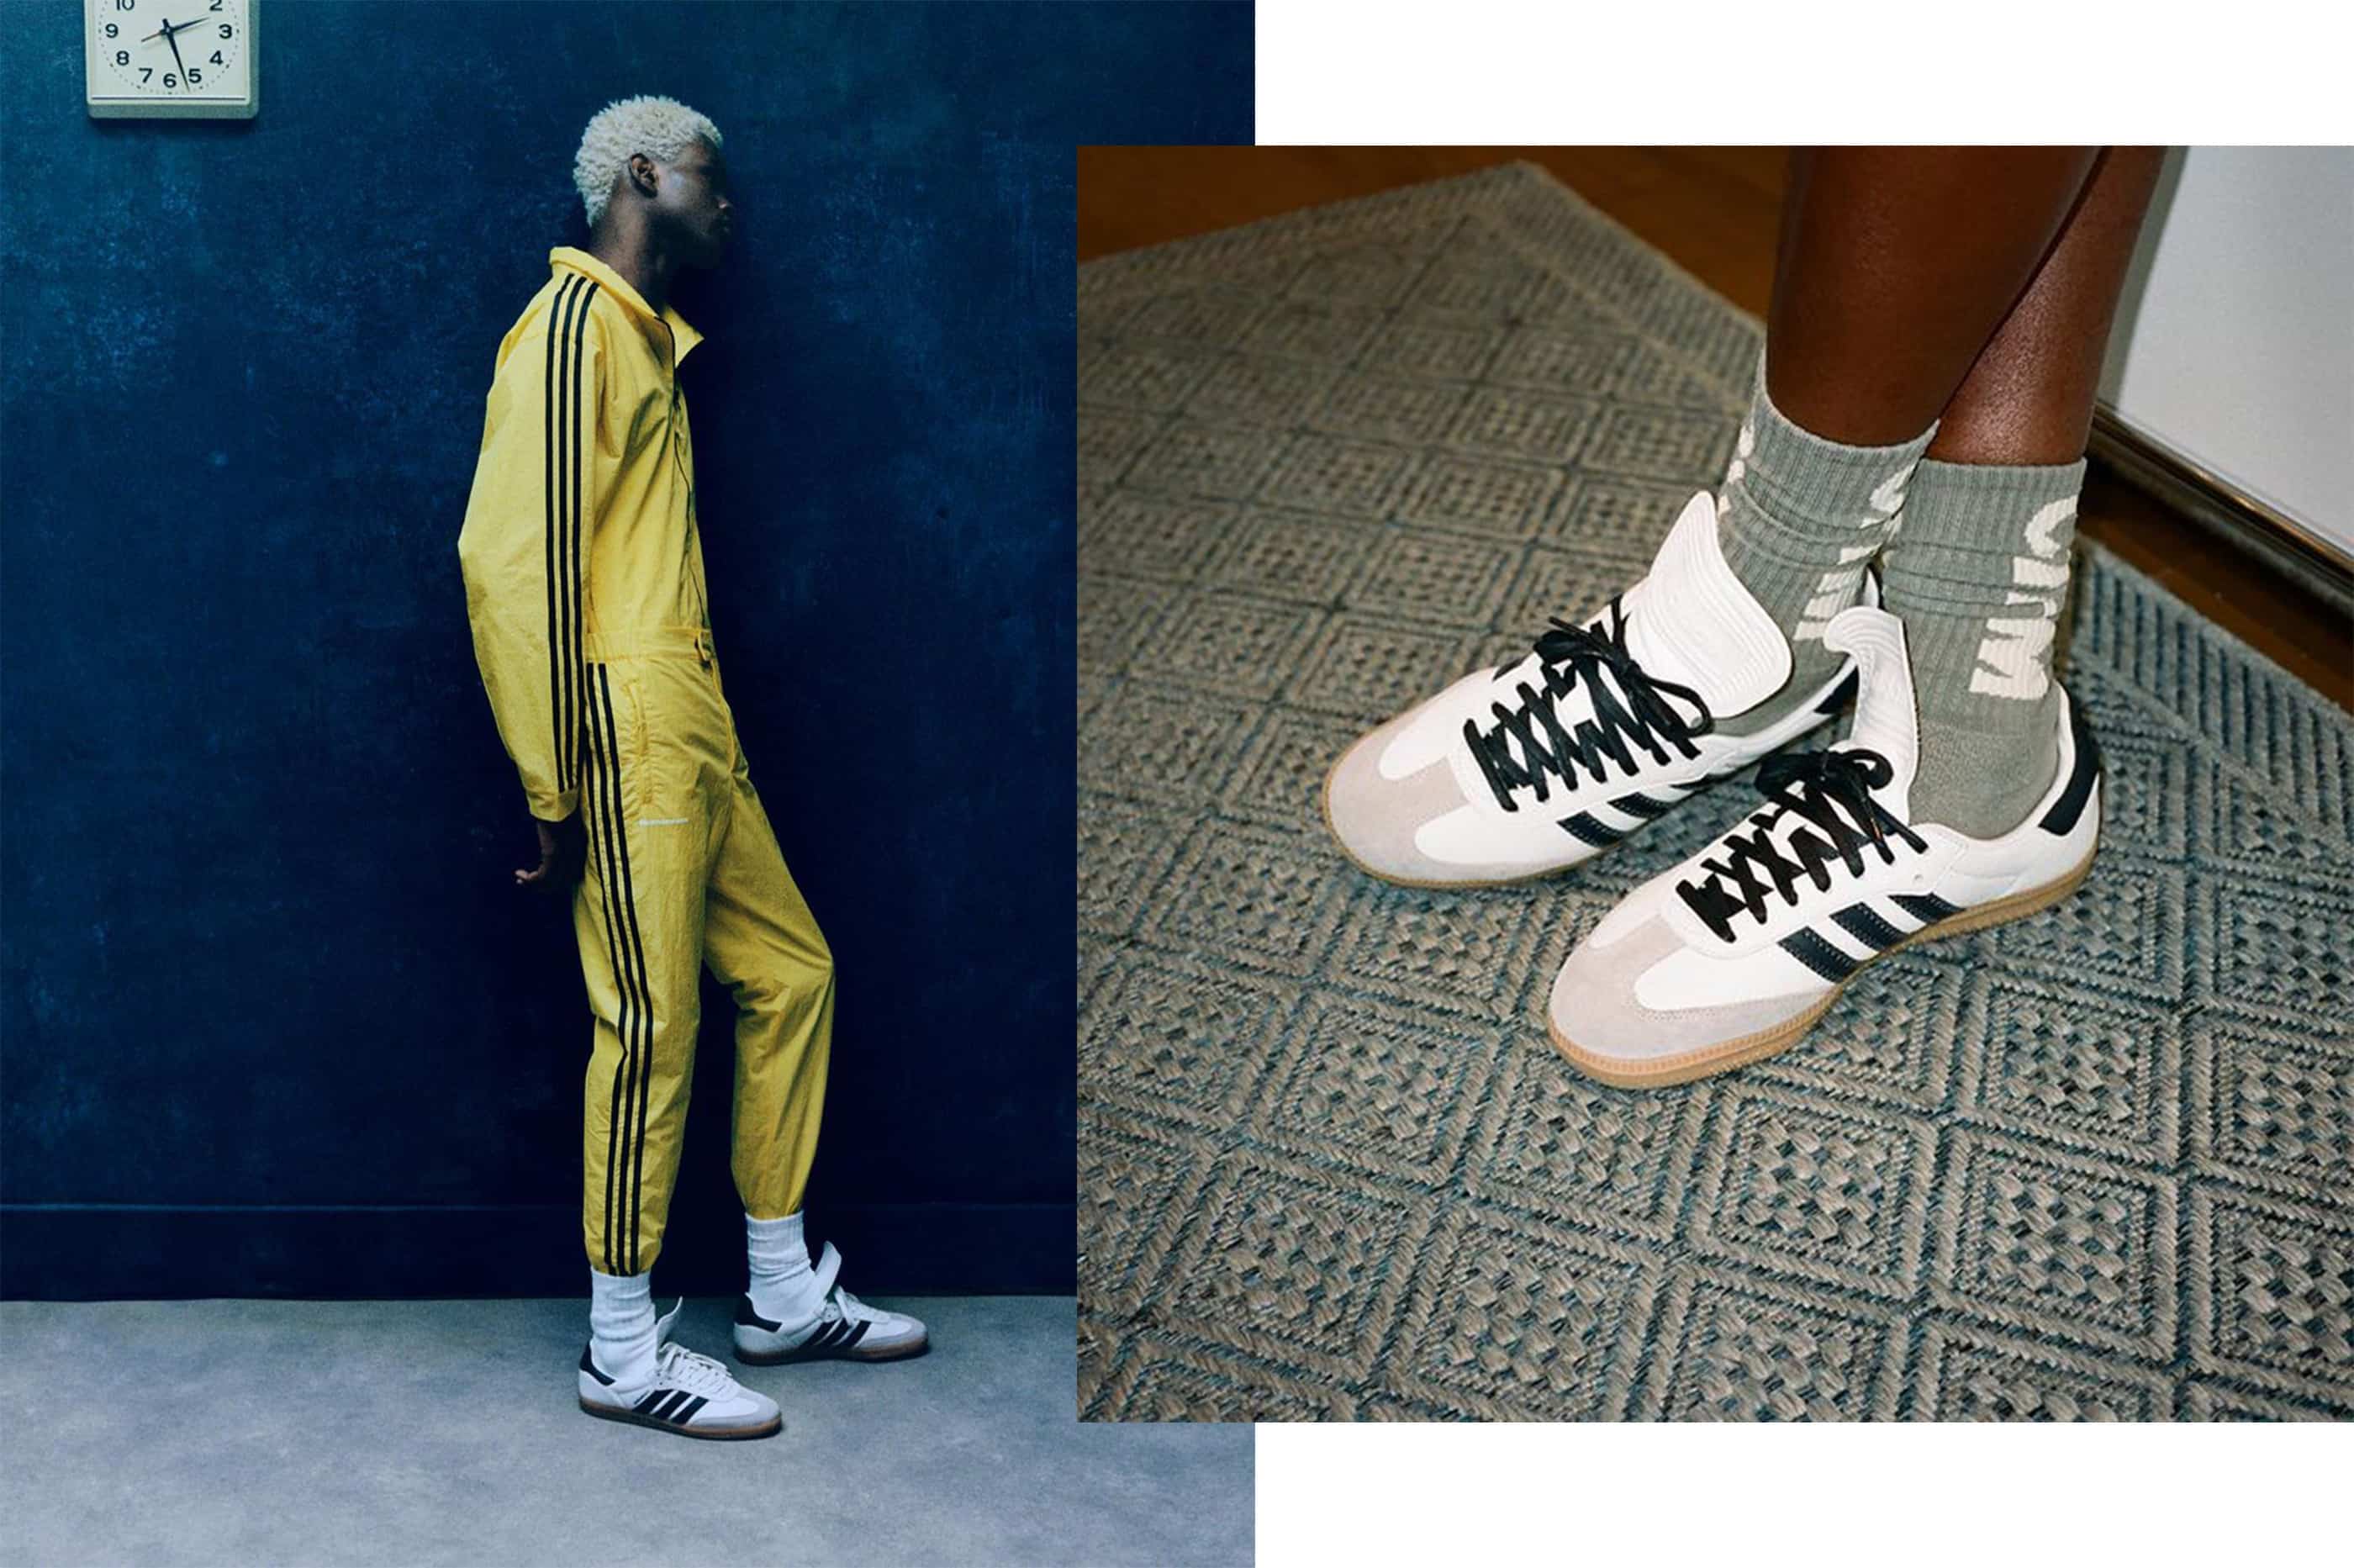 Some Pairs From The Newest Pharrell Williams x adidas Collection